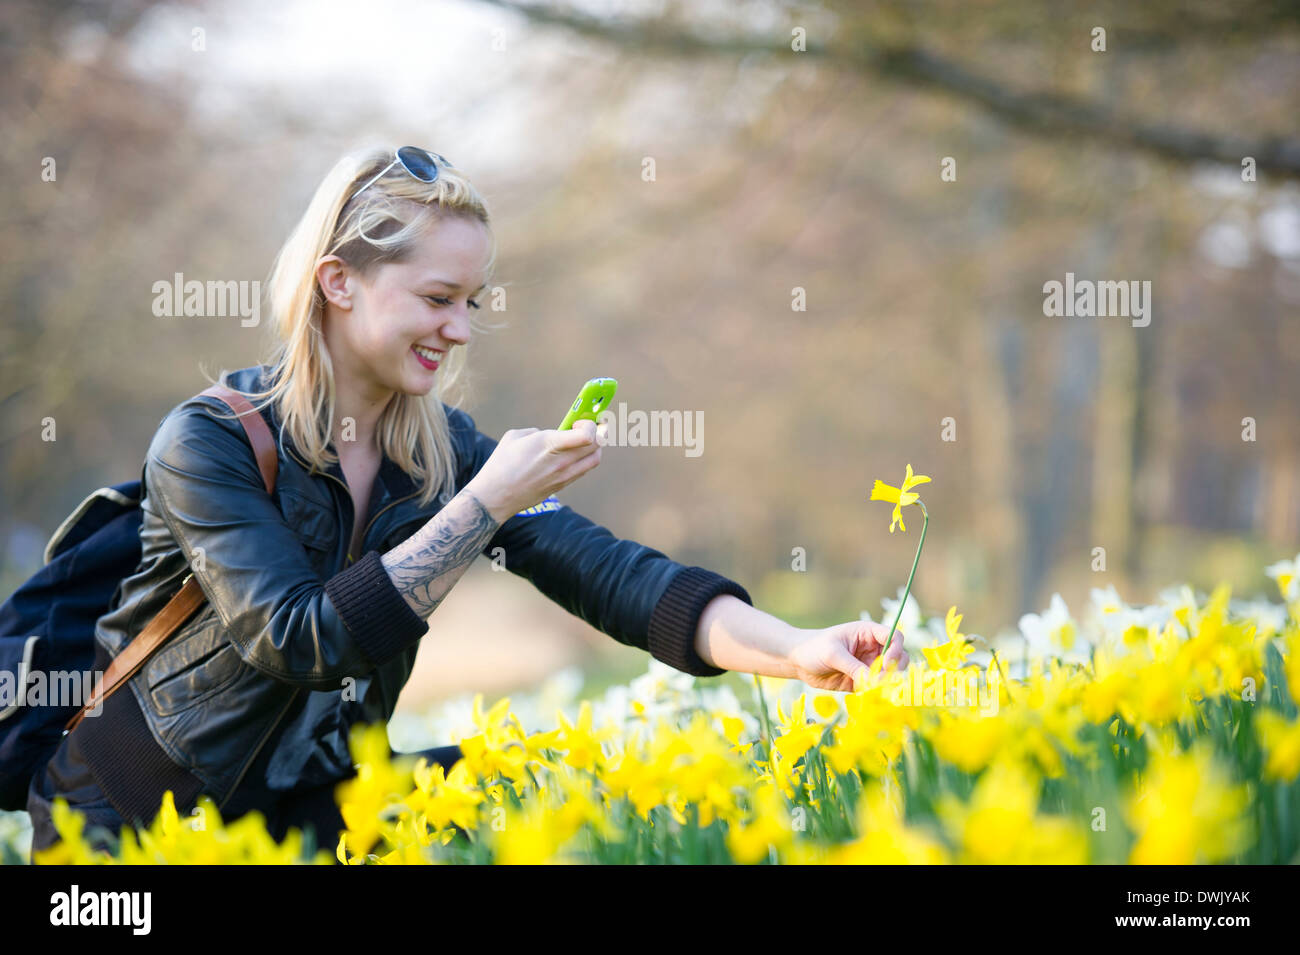 A girl photographs a daffodil flower using her smartphone. Stock Photo